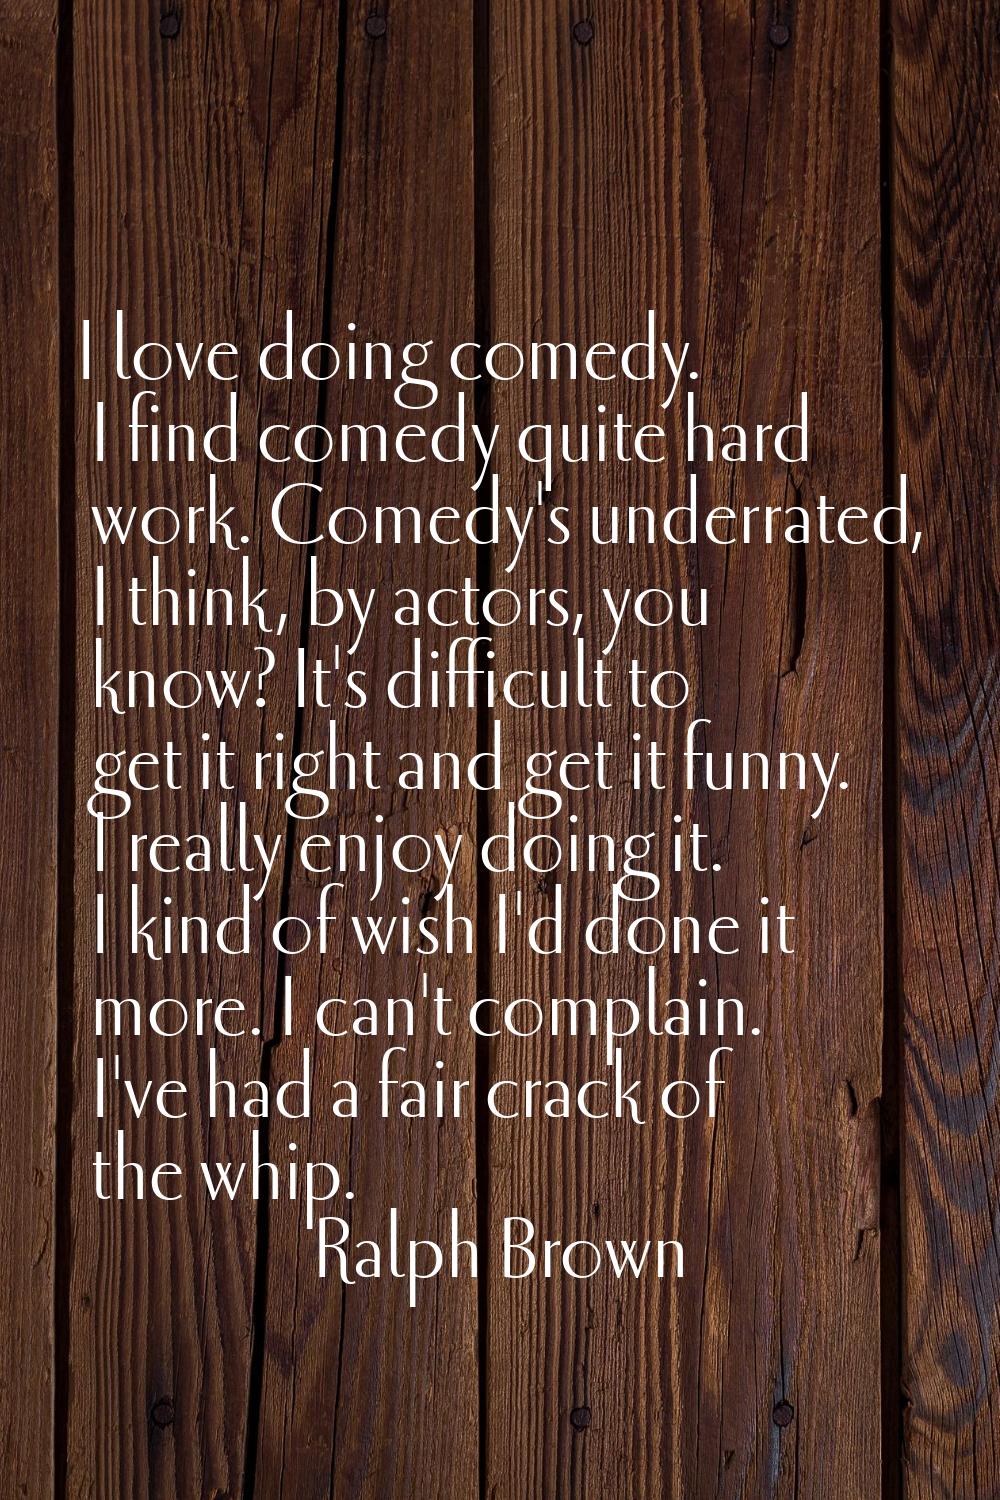 I love doing comedy. I find comedy quite hard work. Comedy's underrated, I think, by actors, you kn